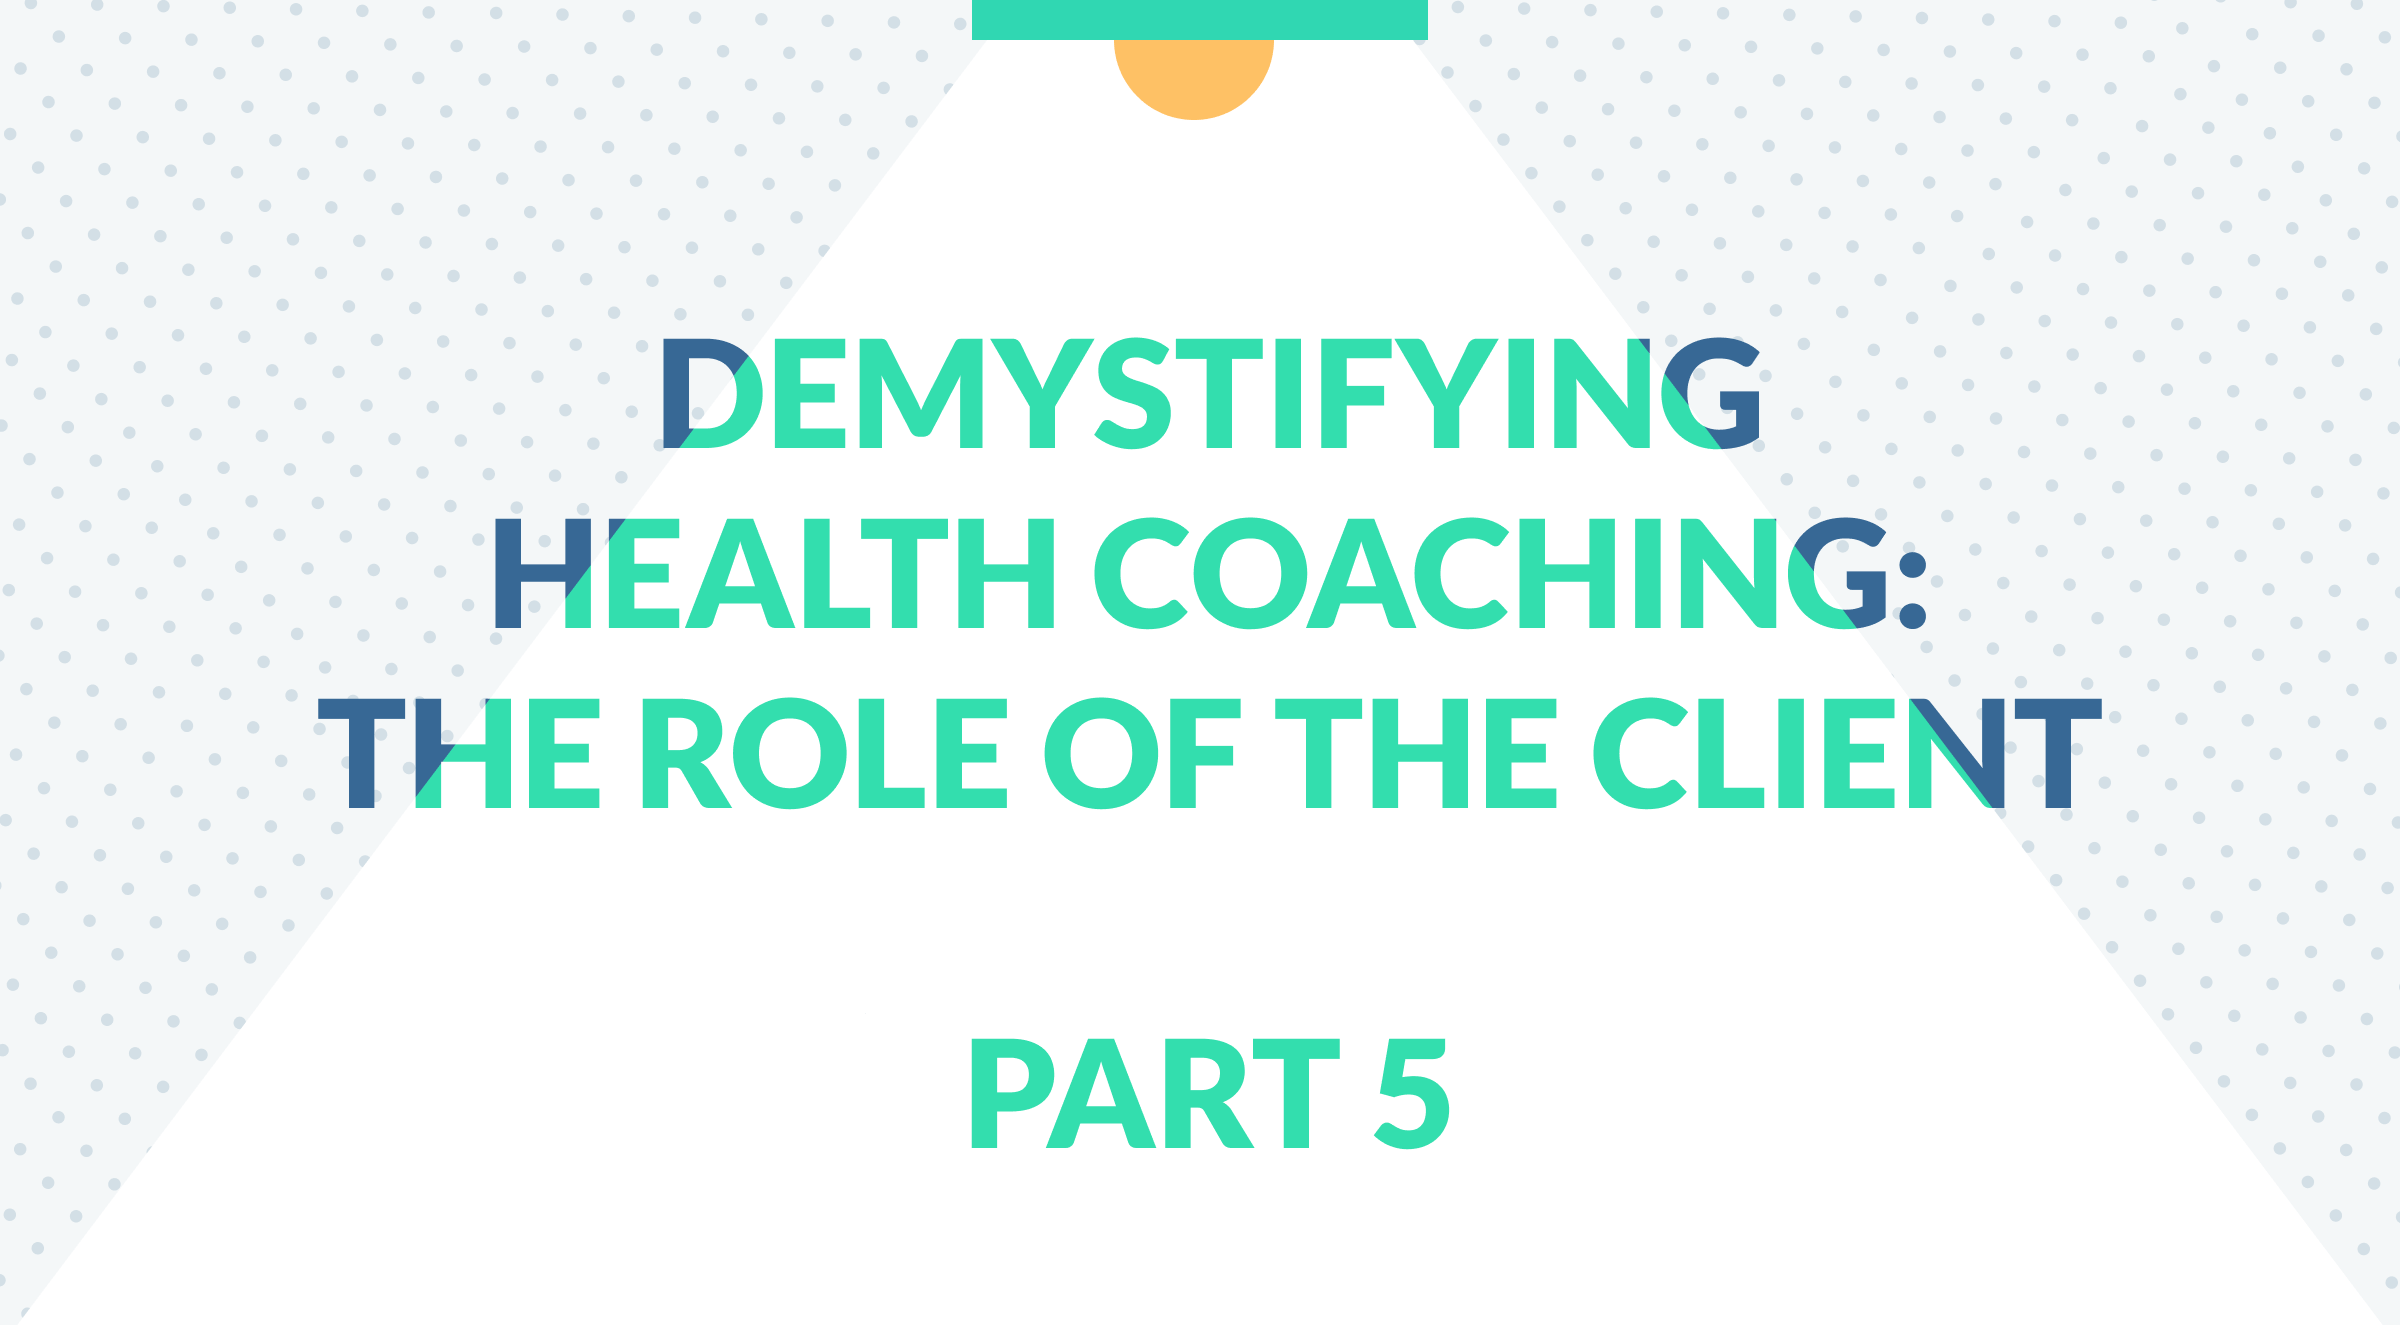 Demystifying Health Coaching: The Role of the Client